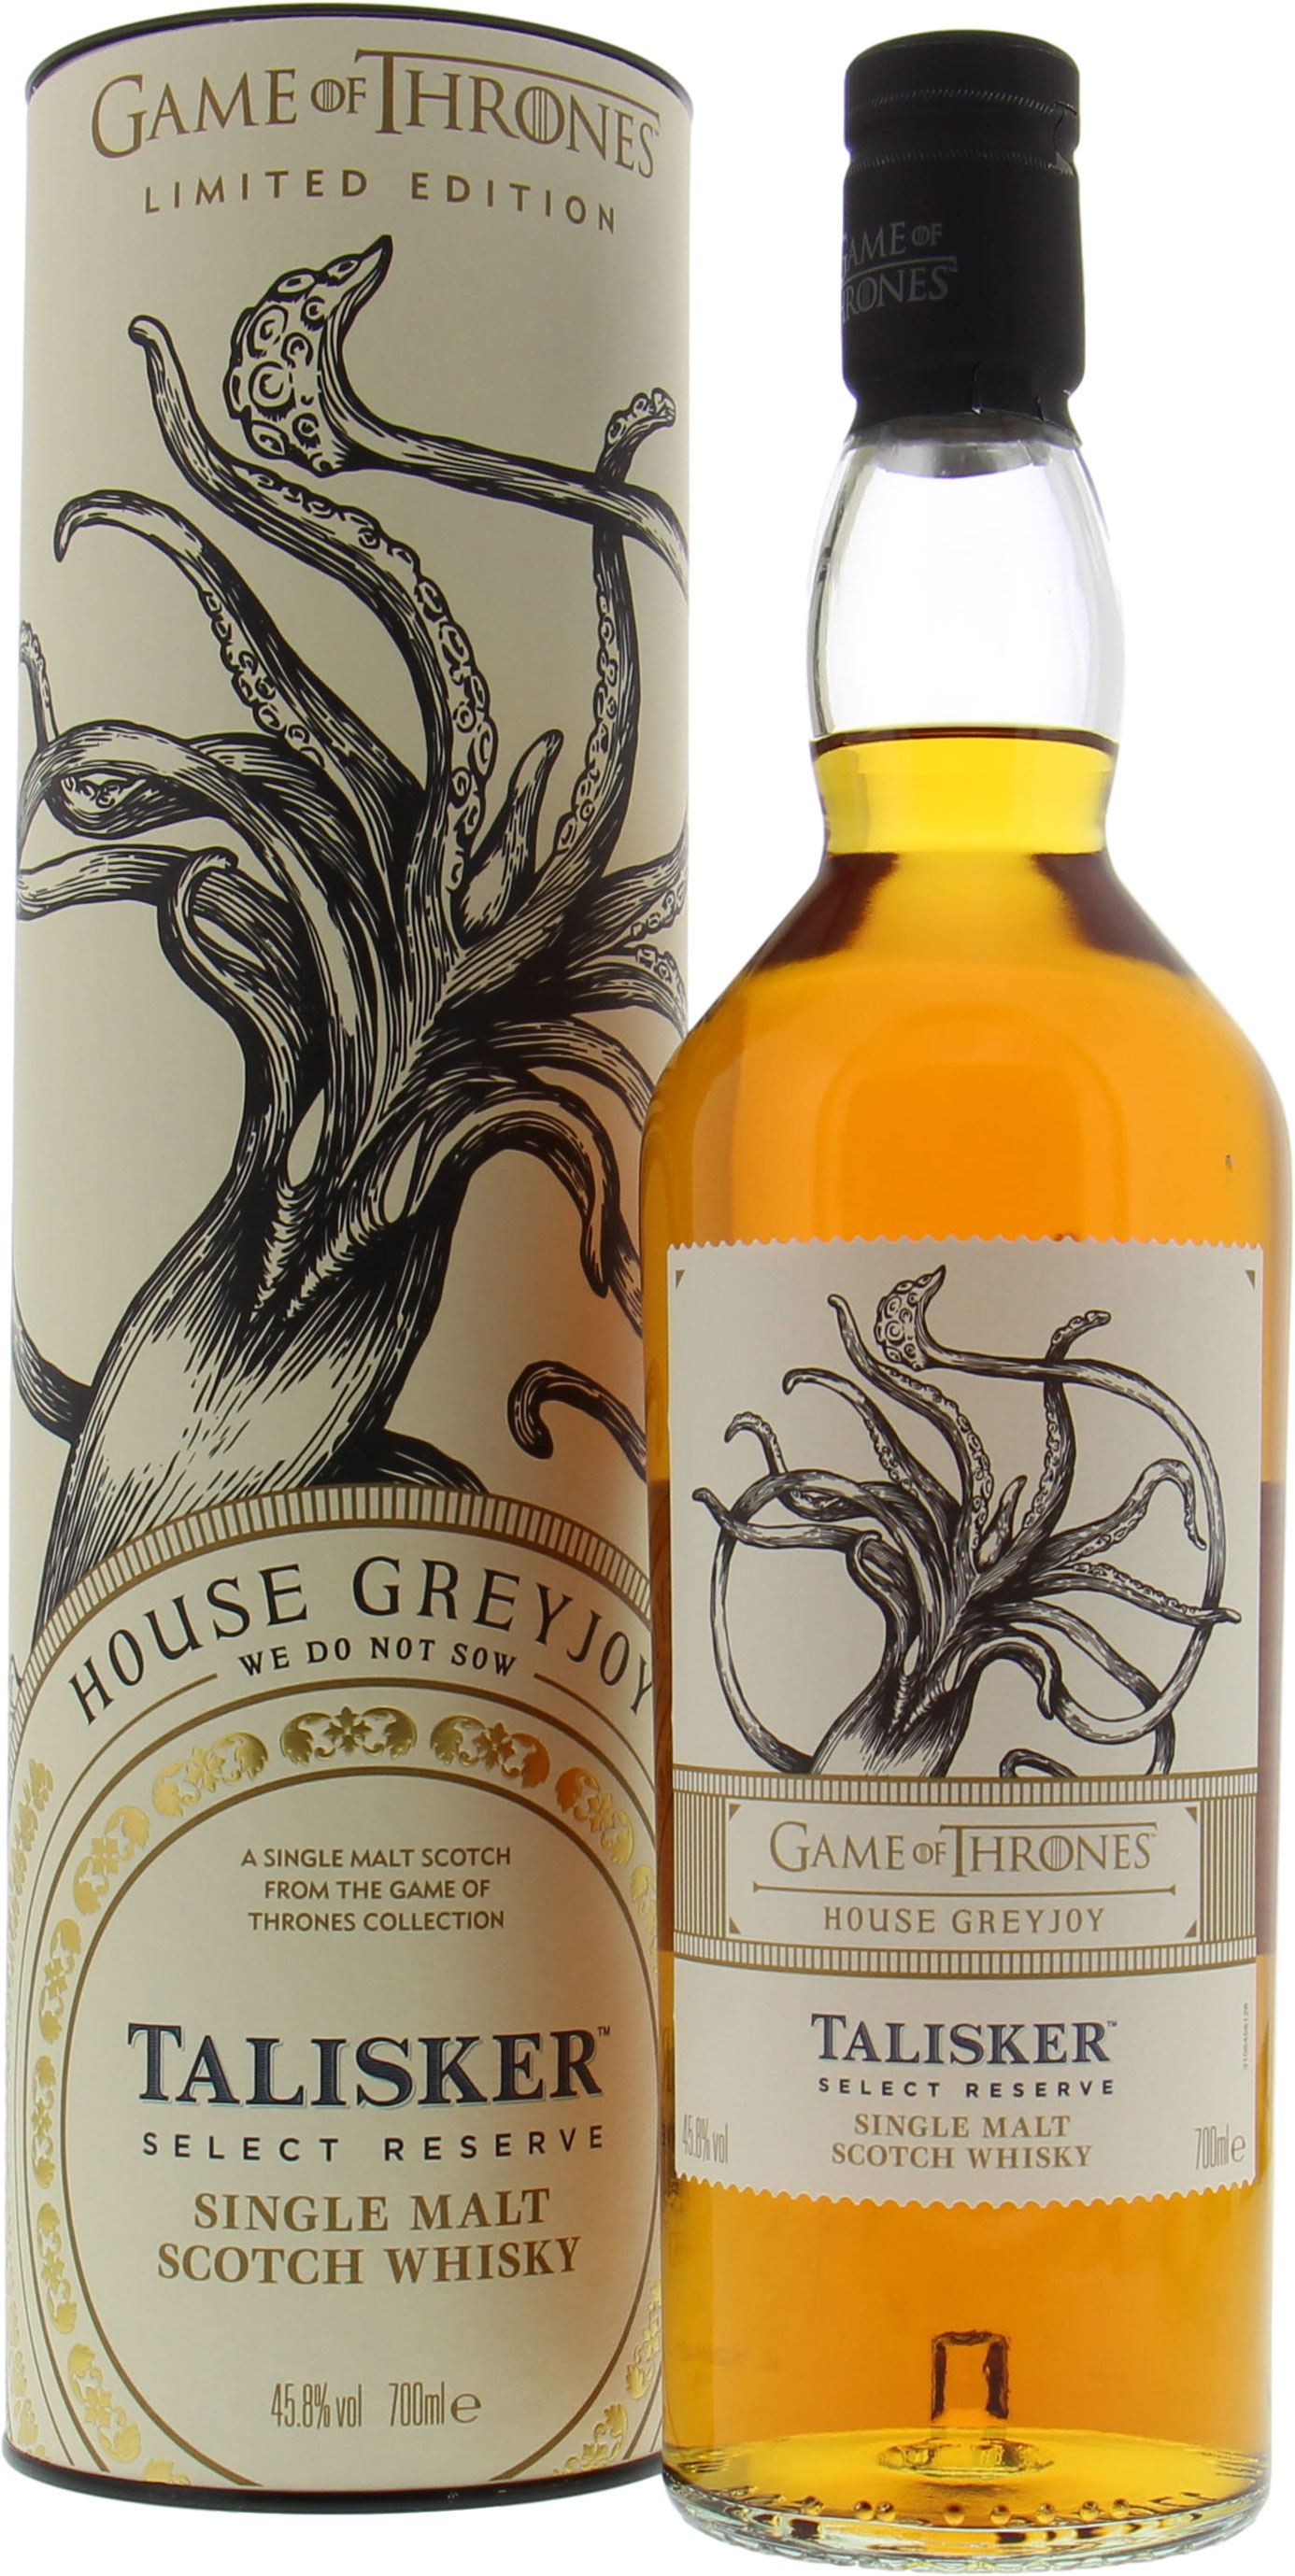 Talisker - Game of Thrones House Greyjoy 45.8% NV In Original Container